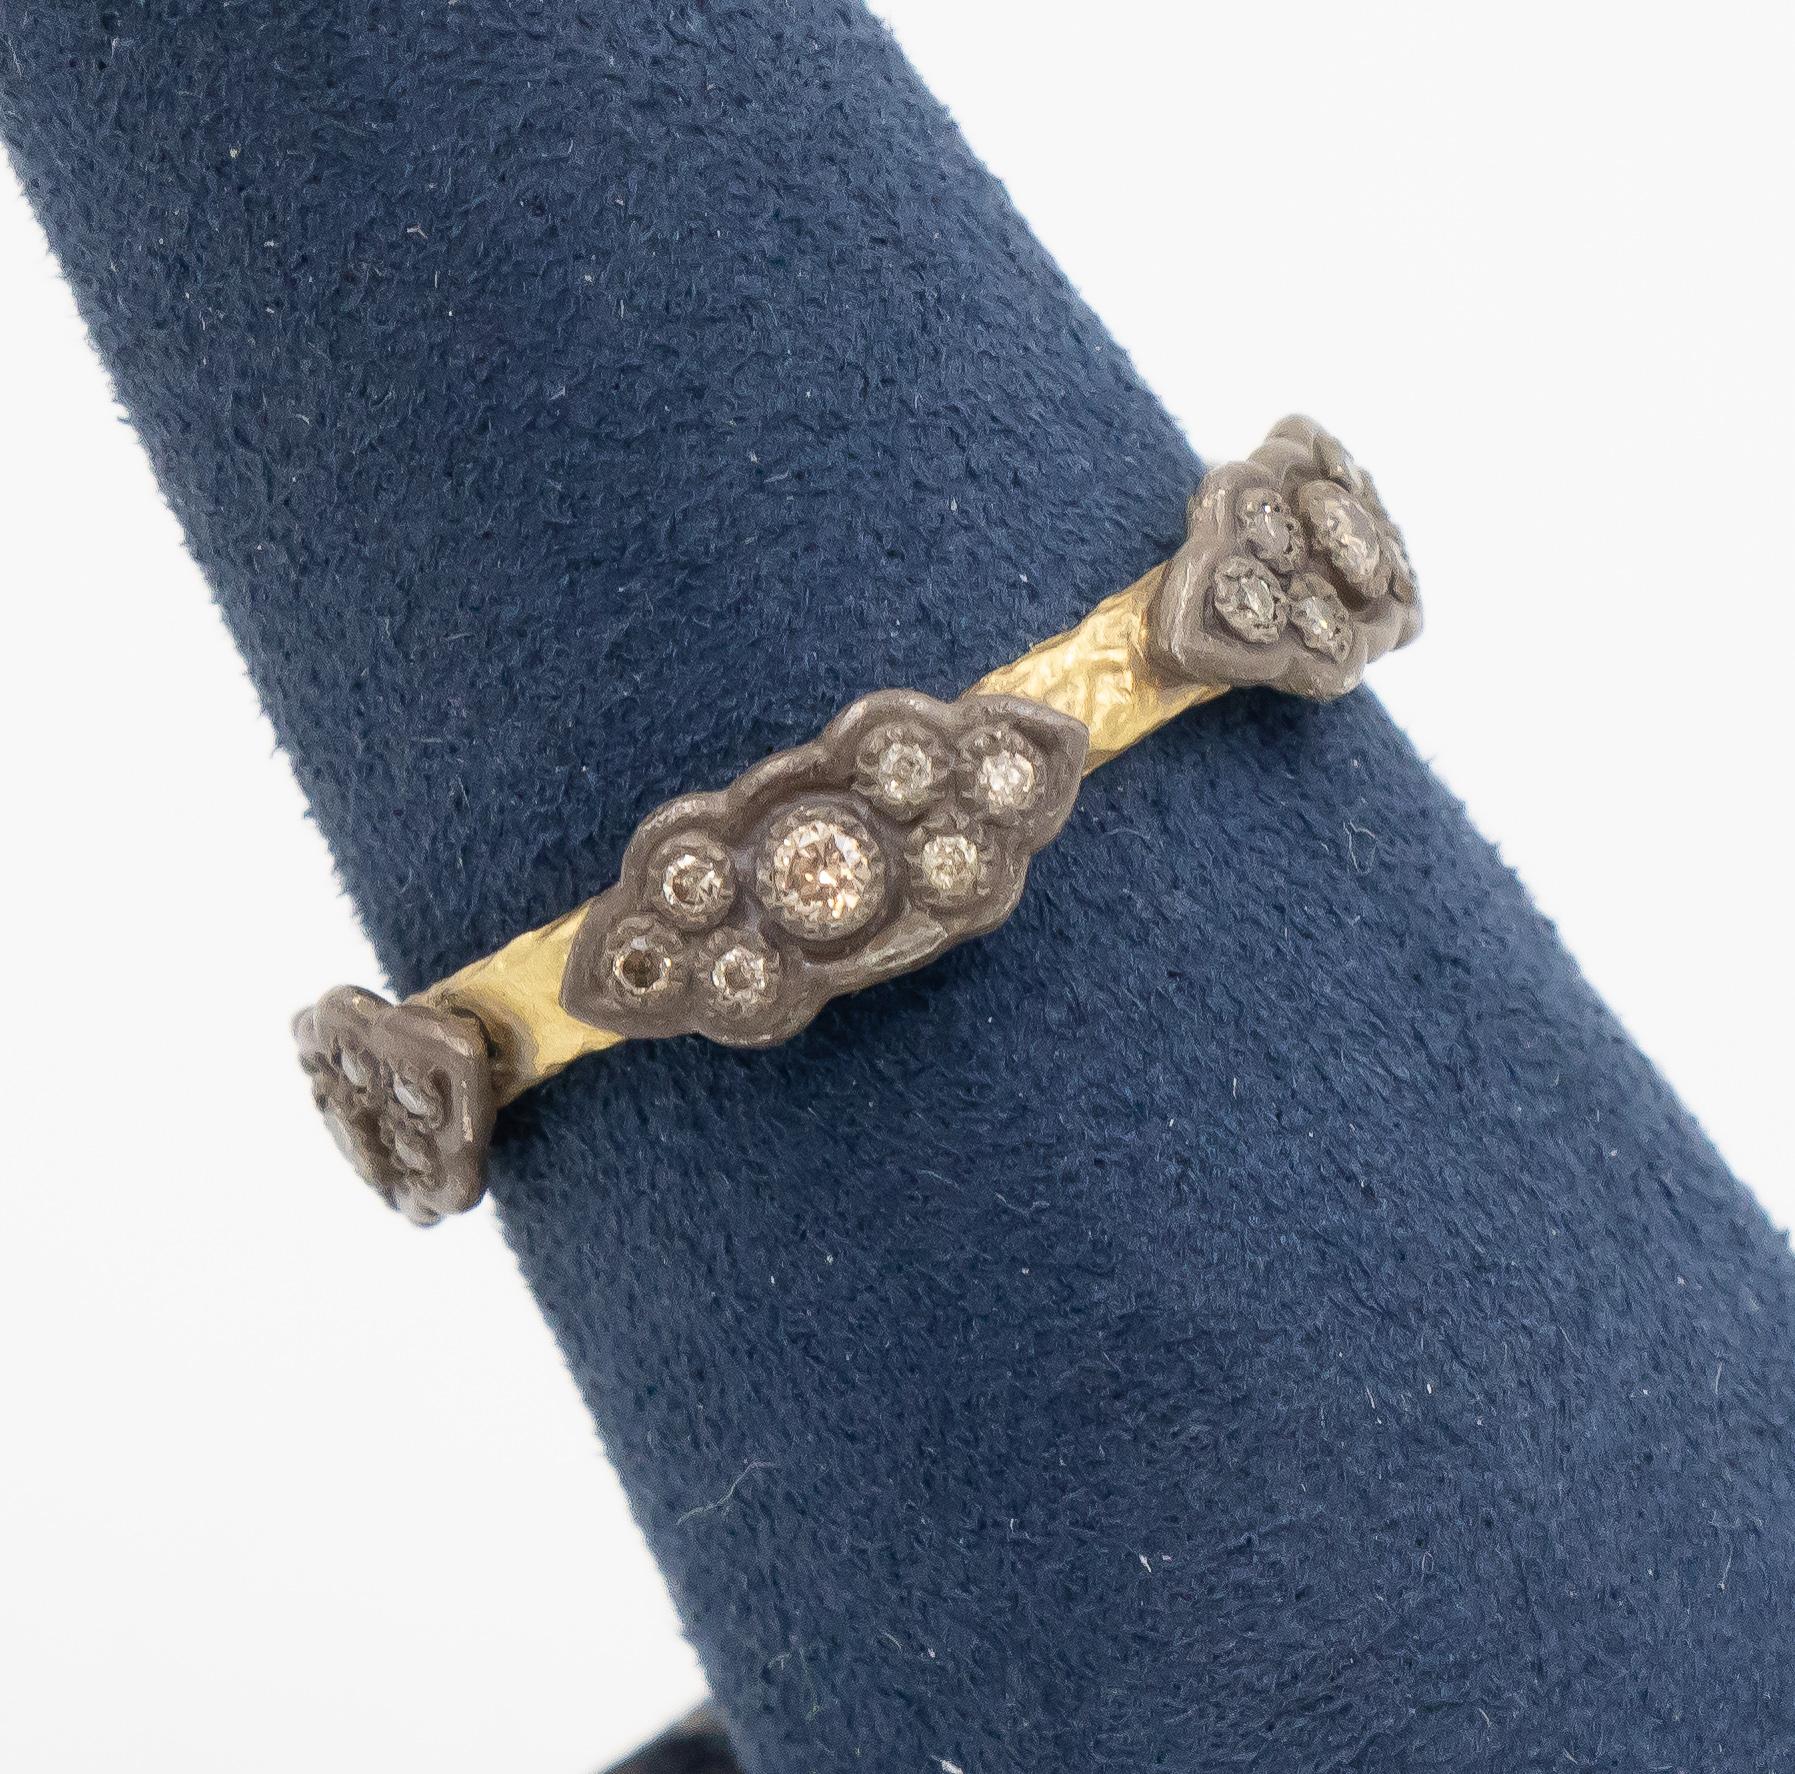 This Old World collection Armenta ring in 18k yellow gold and oxidized silver is luxurious, fun and quite beautiful. The ring has 5 stations featuring champagne diamonds accented by small white diamonds set on the rustic blackened silver.  The 18k